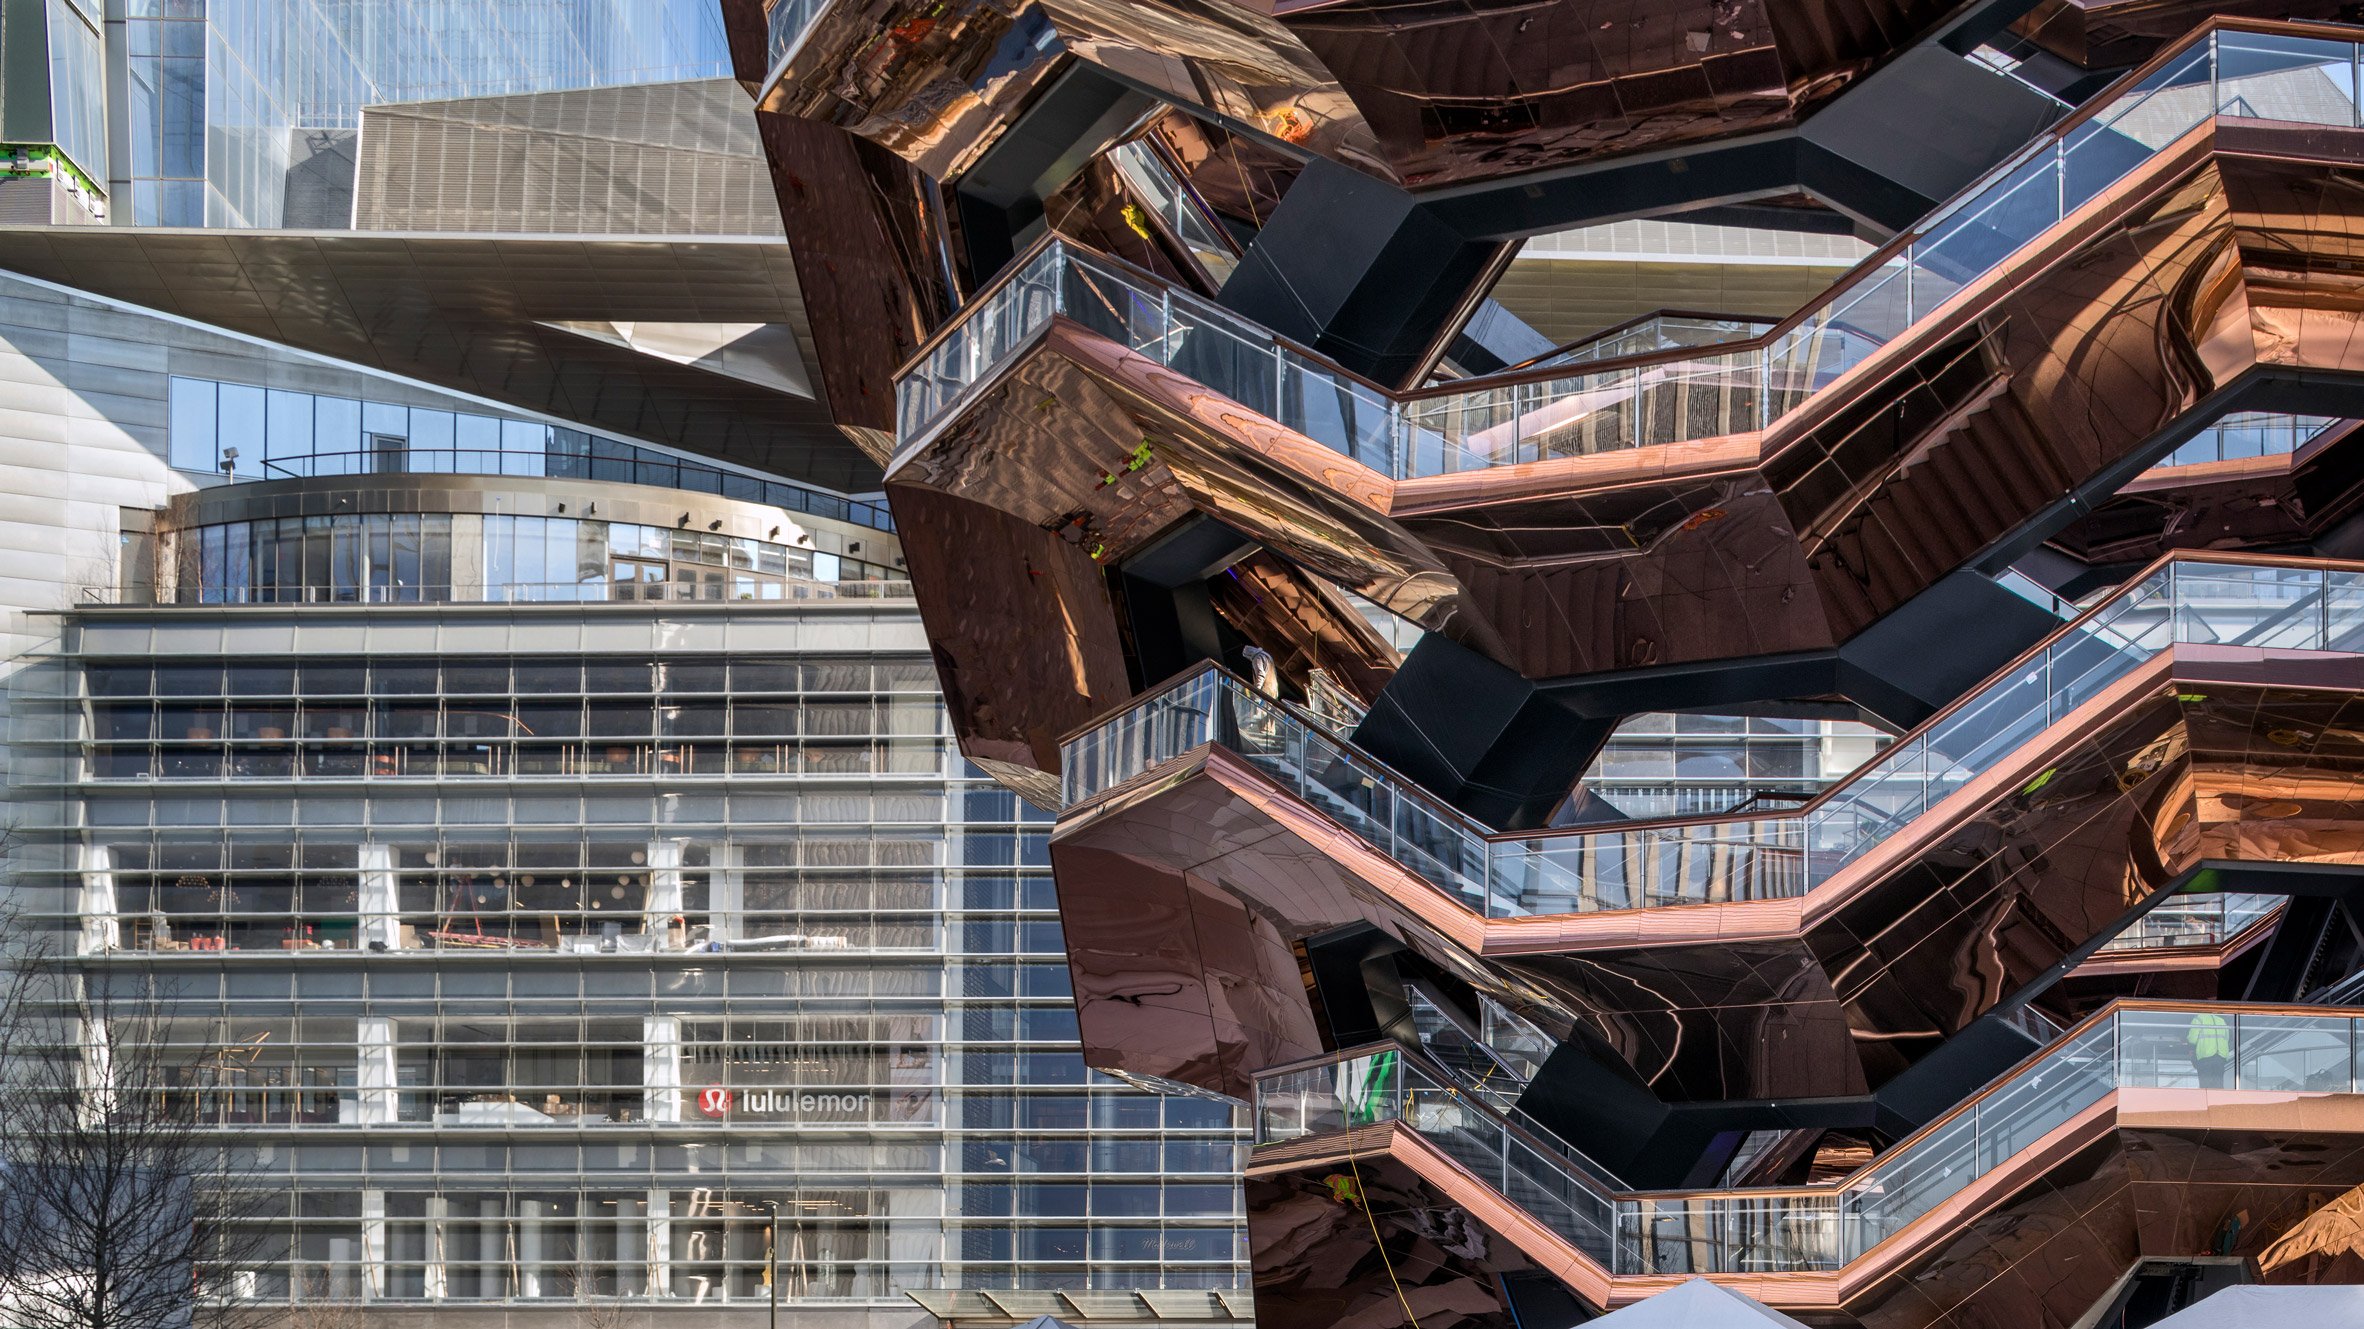 Vessel and The Shops and Restaurants at Hudson Yards